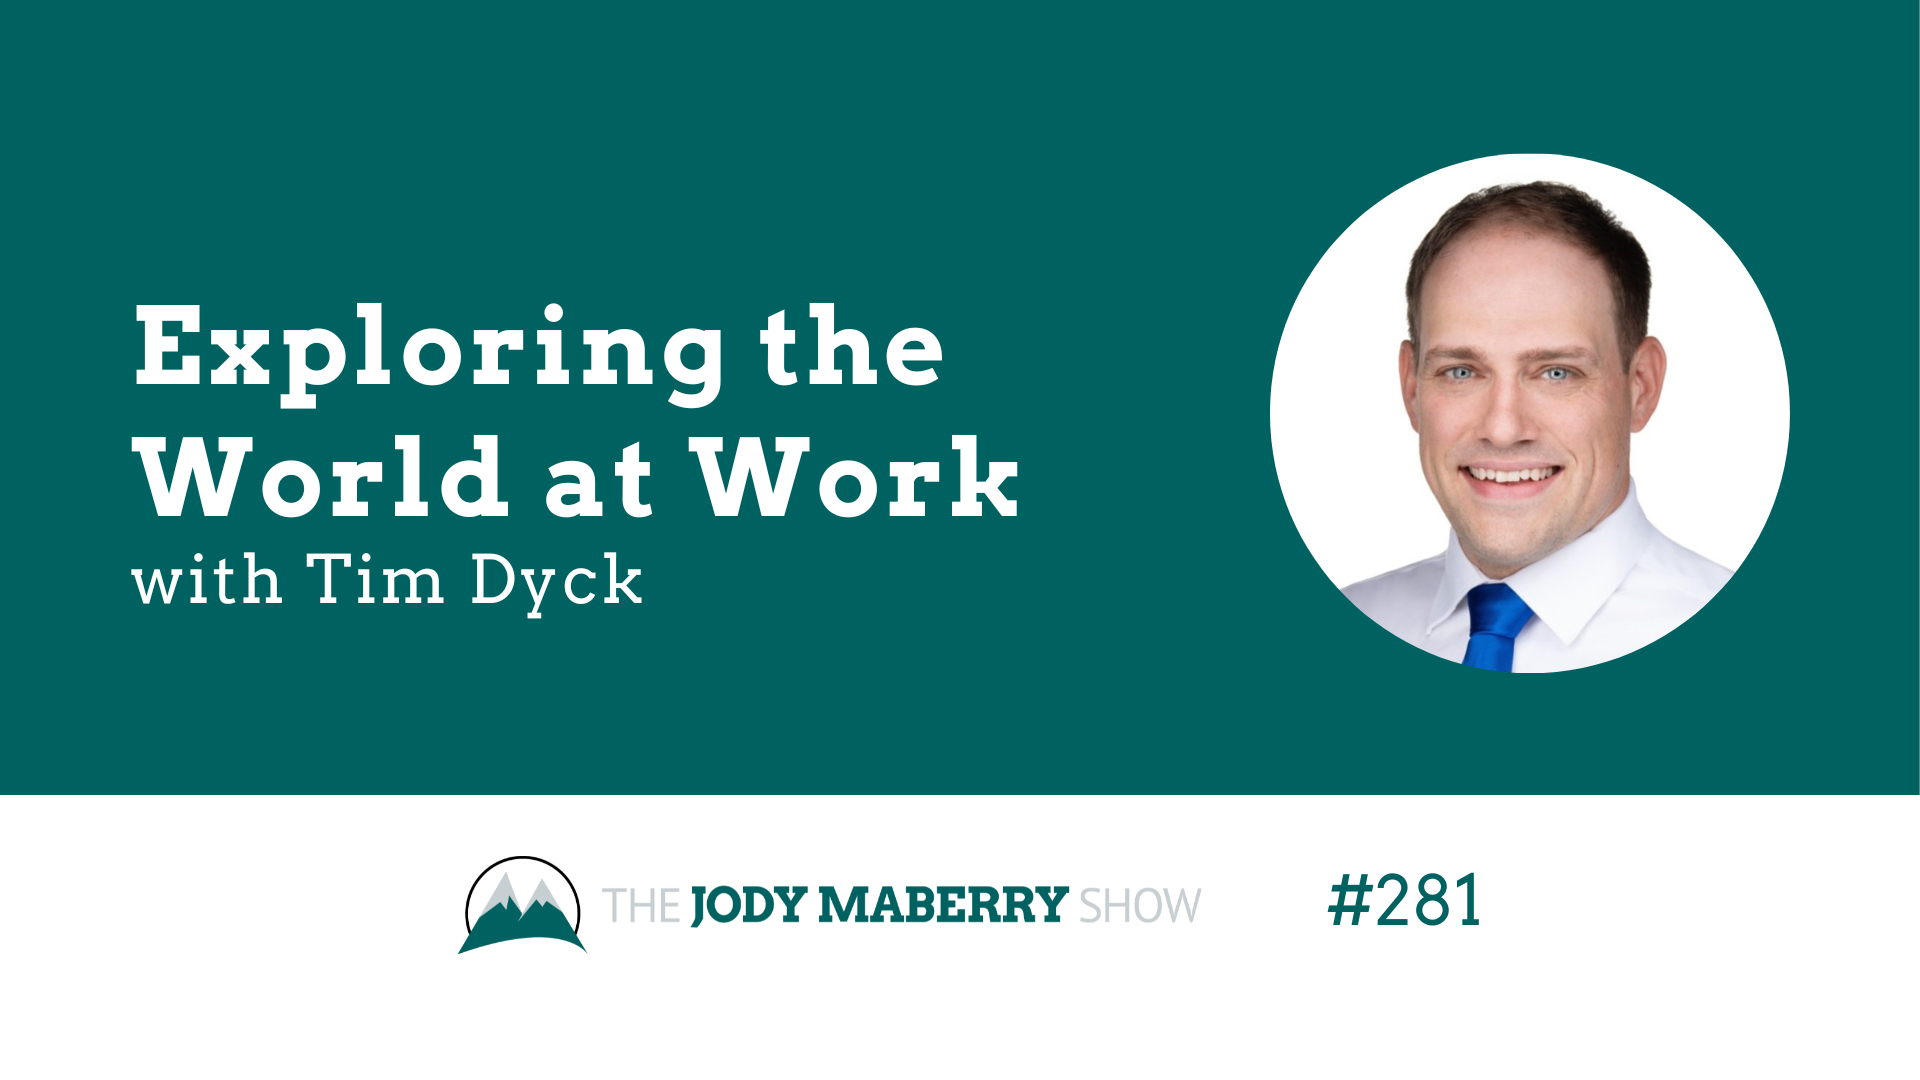 Jody Maberry Show Episode 281 Exploring the World at Work